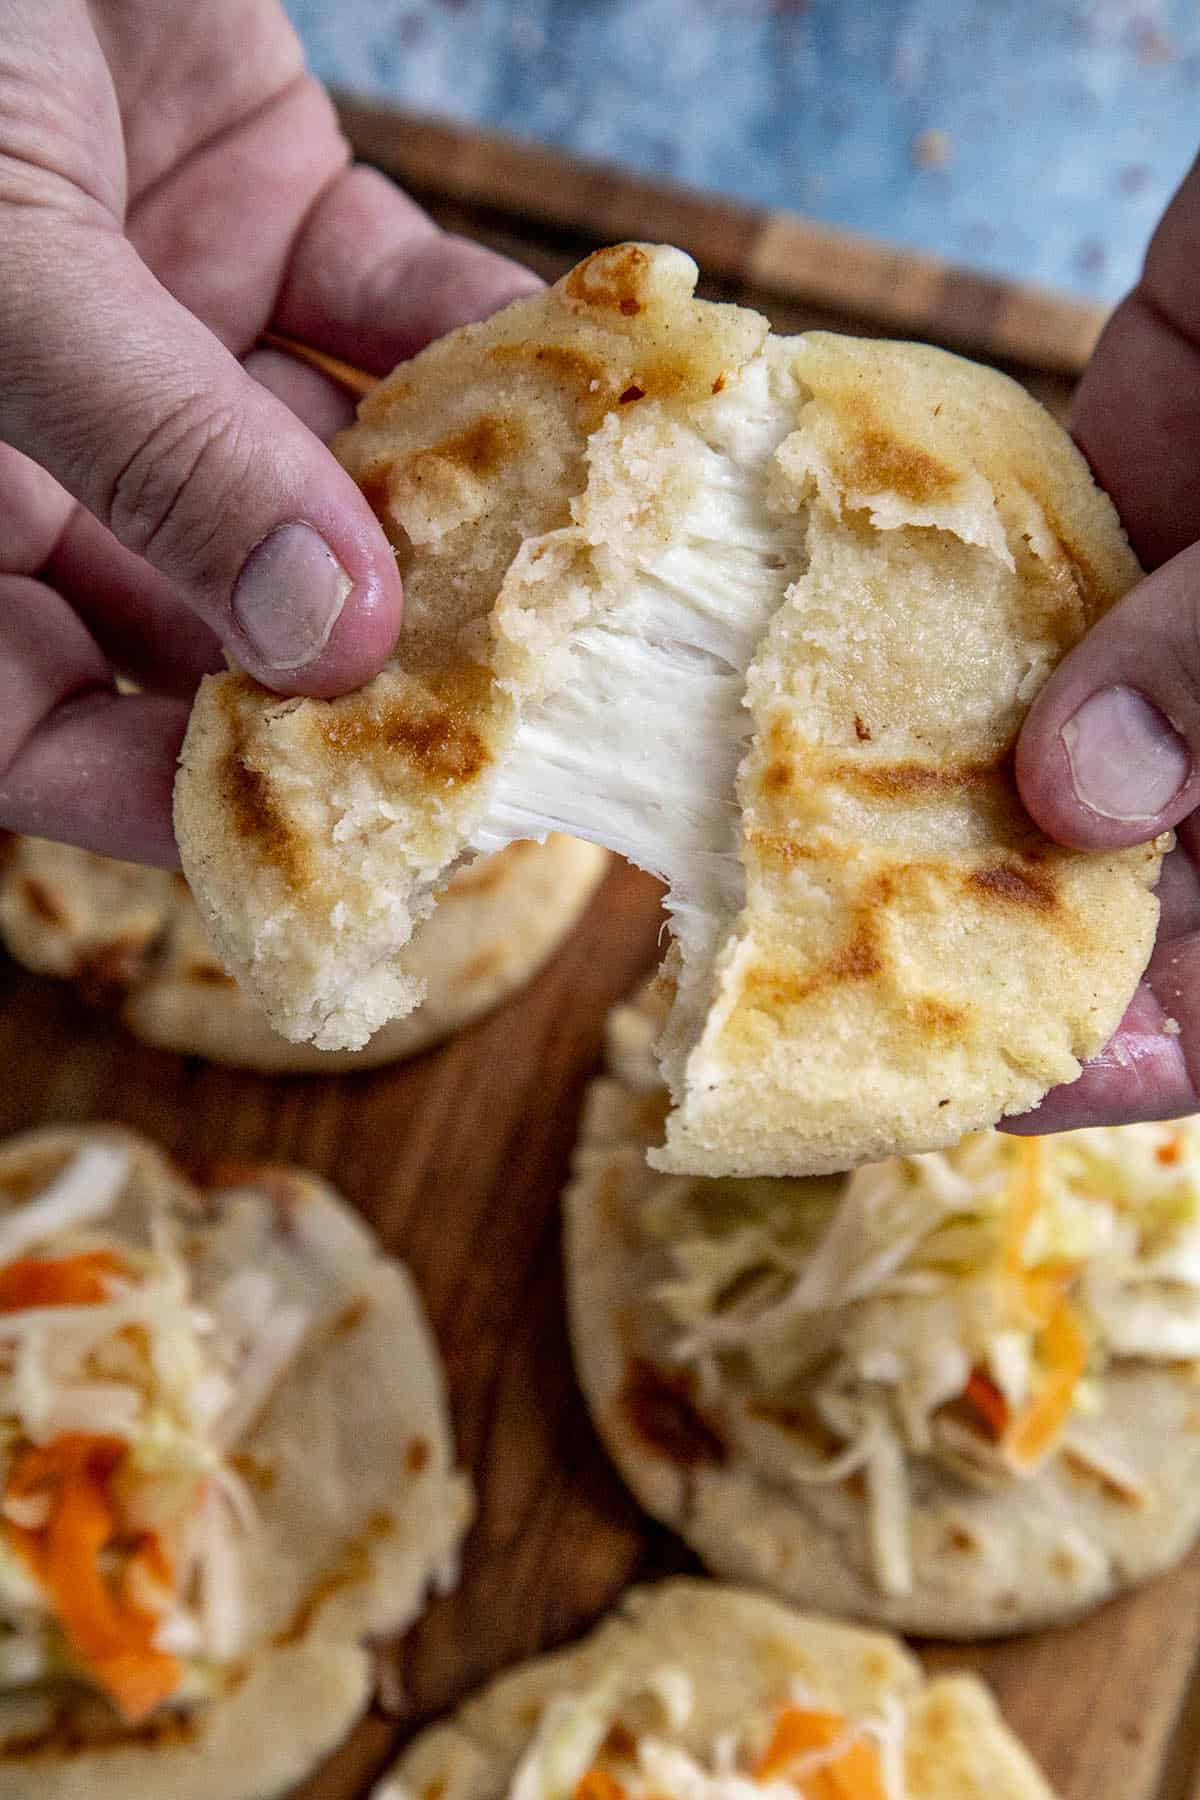 Gooey cheese stretching out from pulling apart a pupusa